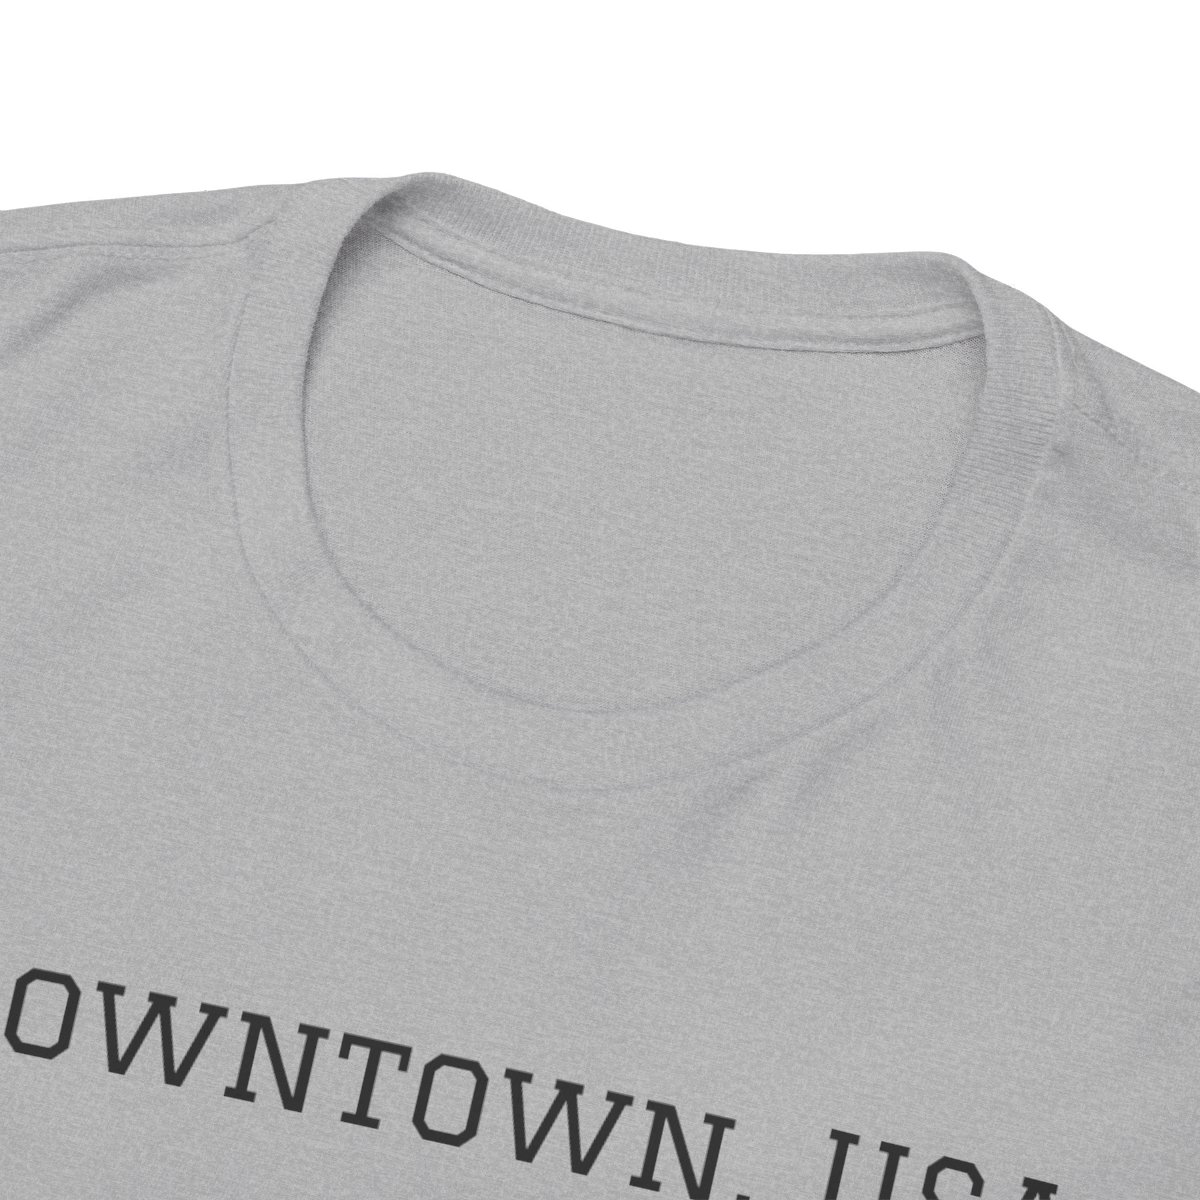 Browntown, USA  Unisex Heavy Cotton Tee product thumbnail image